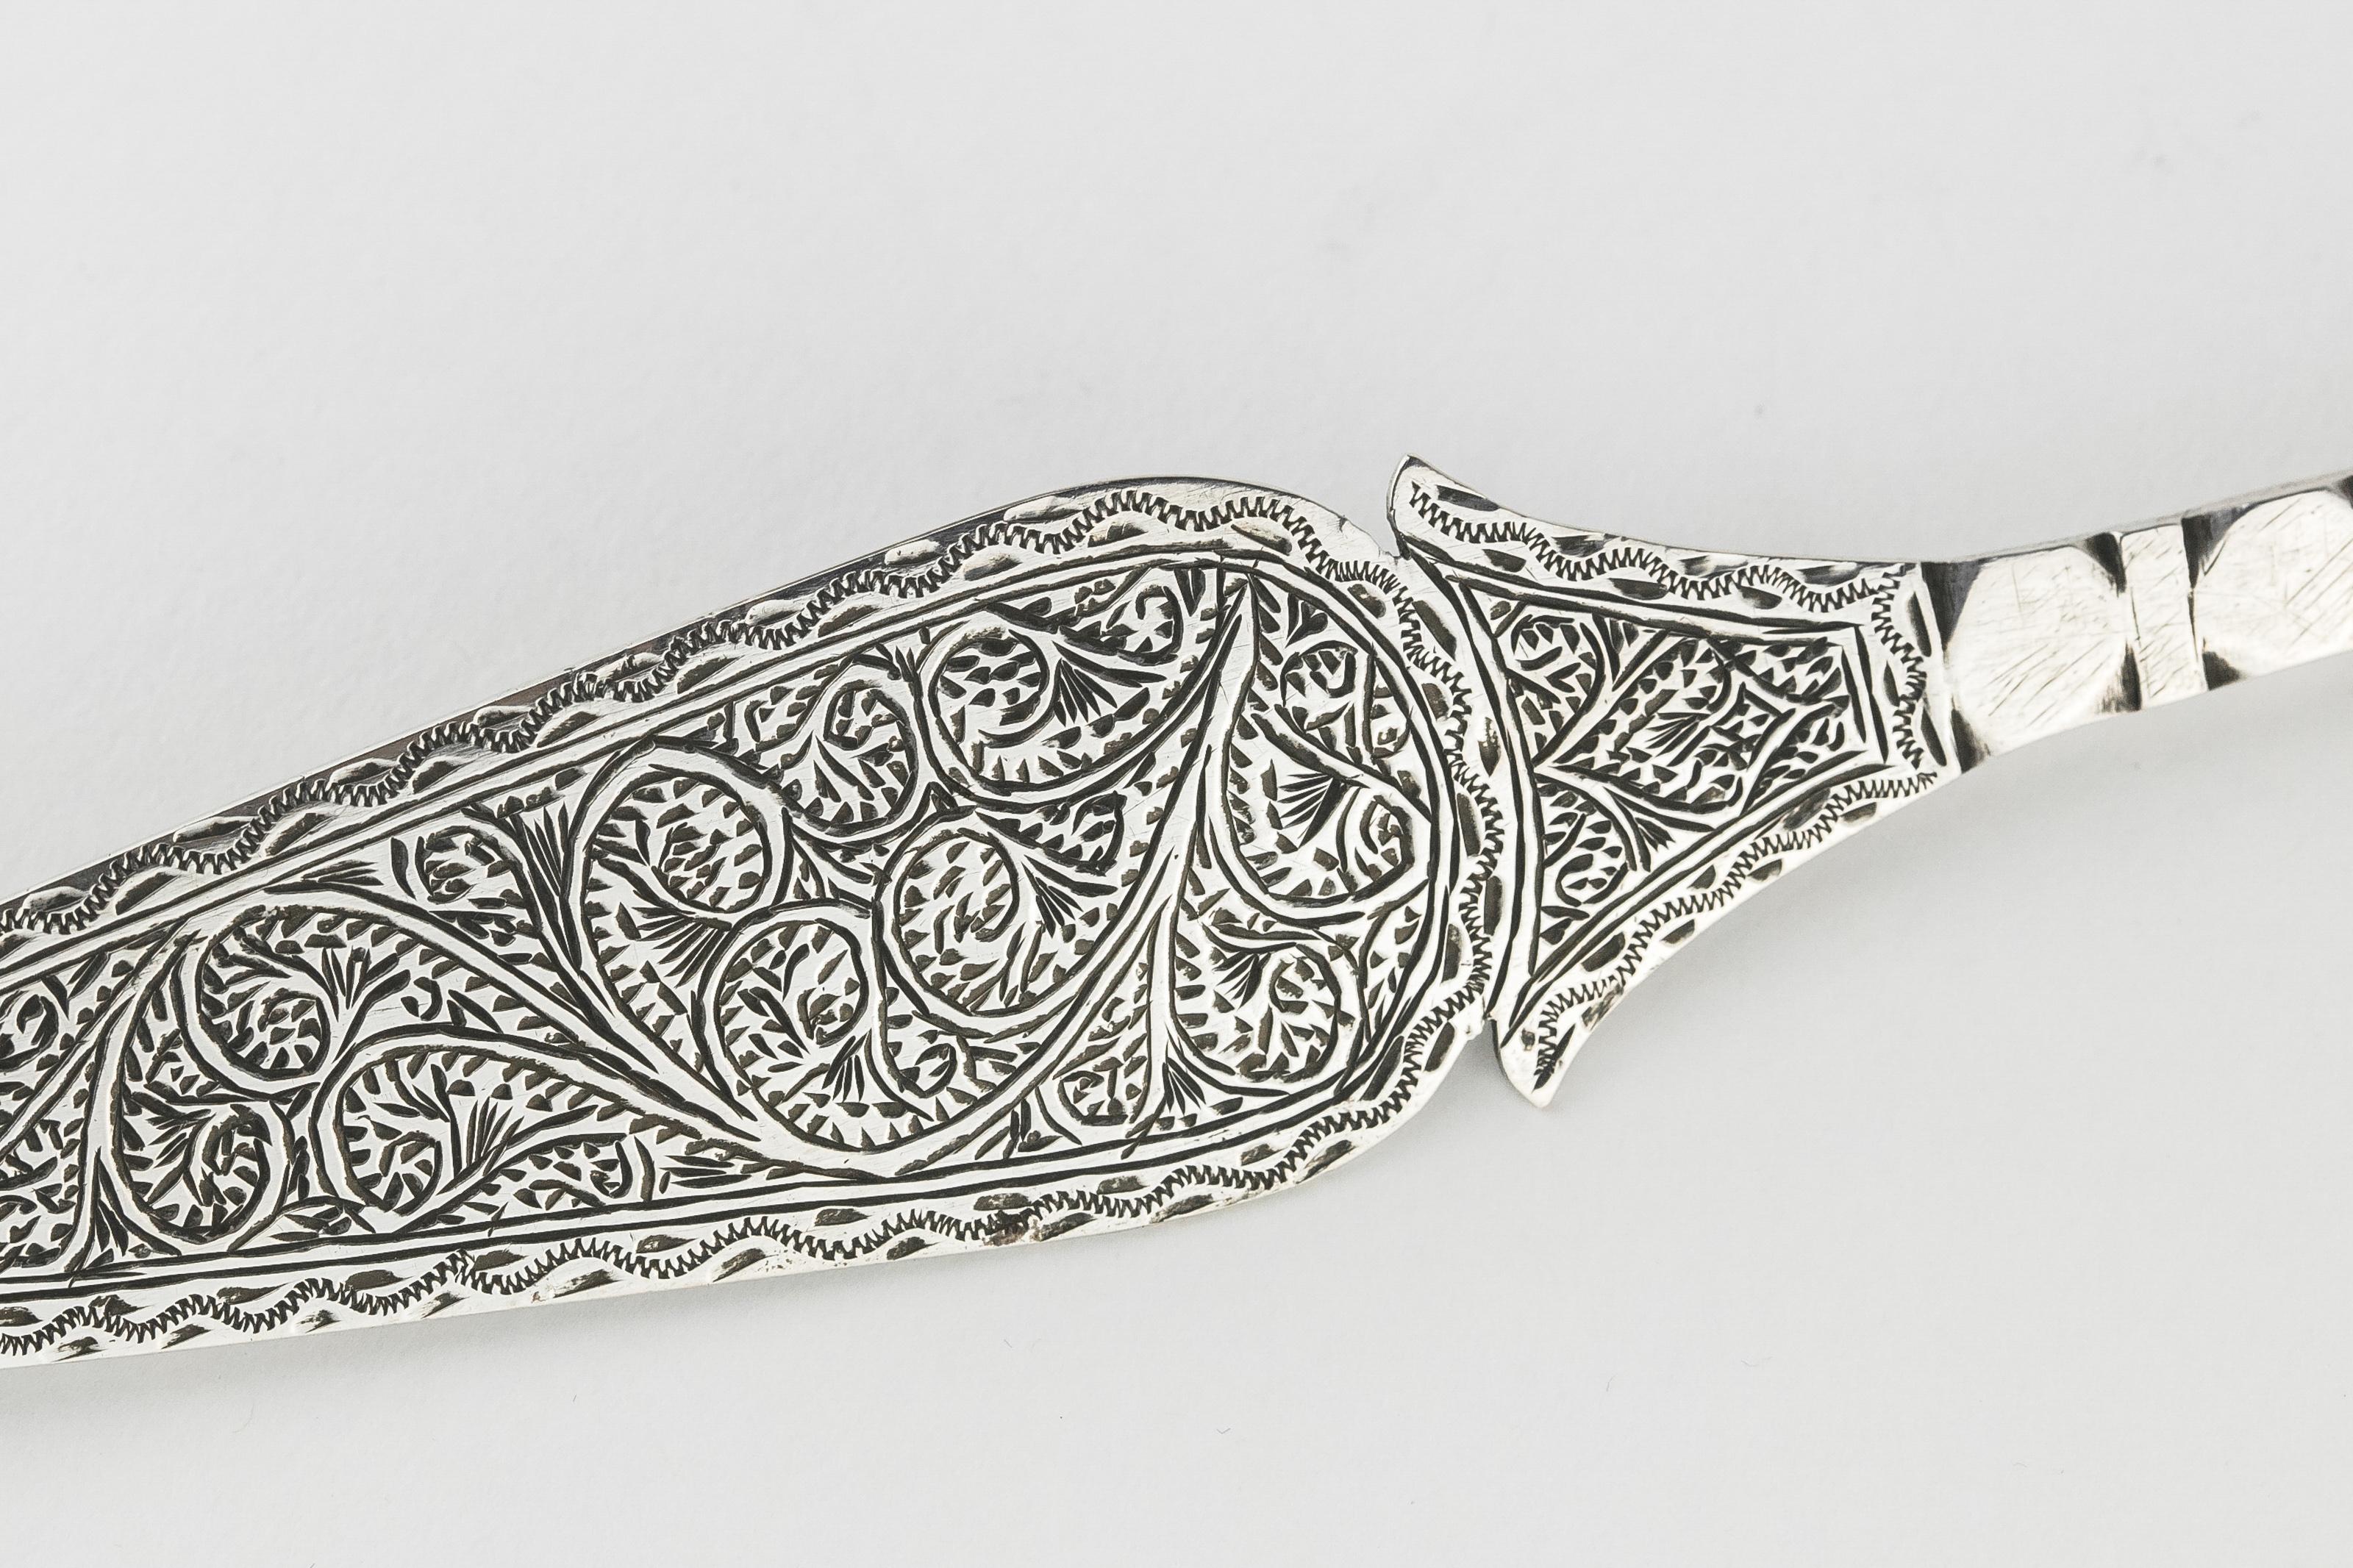 Engraved Mid-20th Century North-African Silver Torah Pointer